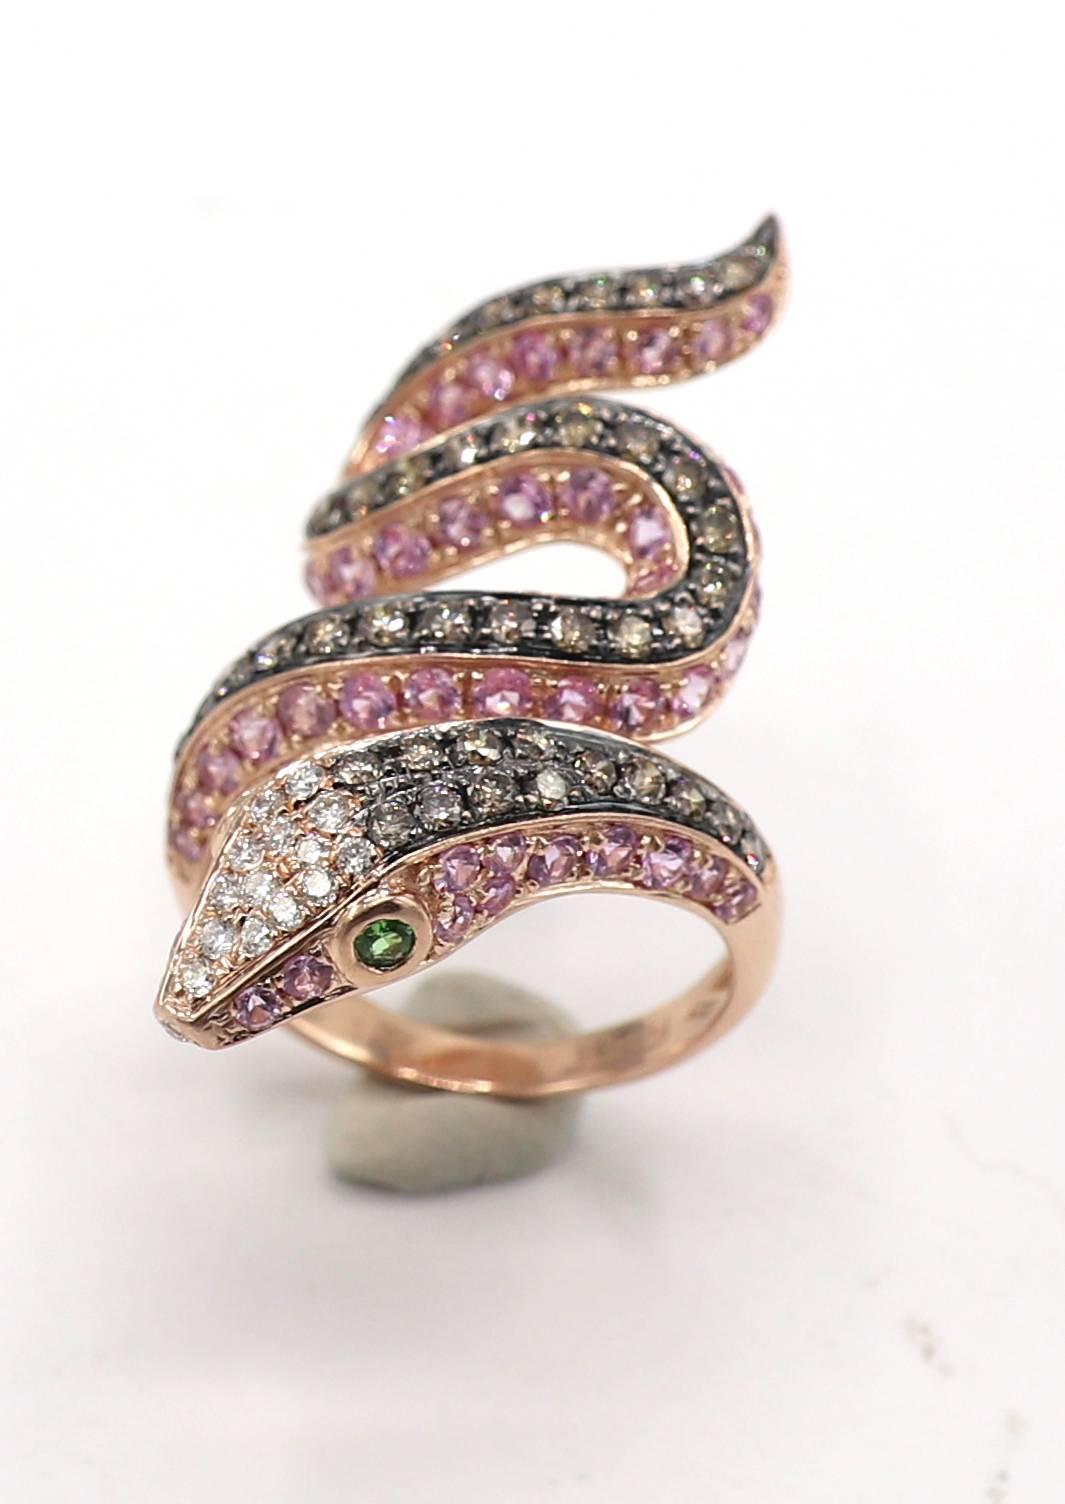 EFFY Safari 14K Rose Gold Pink Sapphire & Diamond Snake Cocktail Statement Ring 
Metal: 14k rose pink gold
Weight: 7.67 grams
Length: 40mm
Width: 20mm
Diamonds: Approx. 1.50 CTW G-H VS-SI and brown diamonds 
Size: 7 (US)
Retail: $6,495
